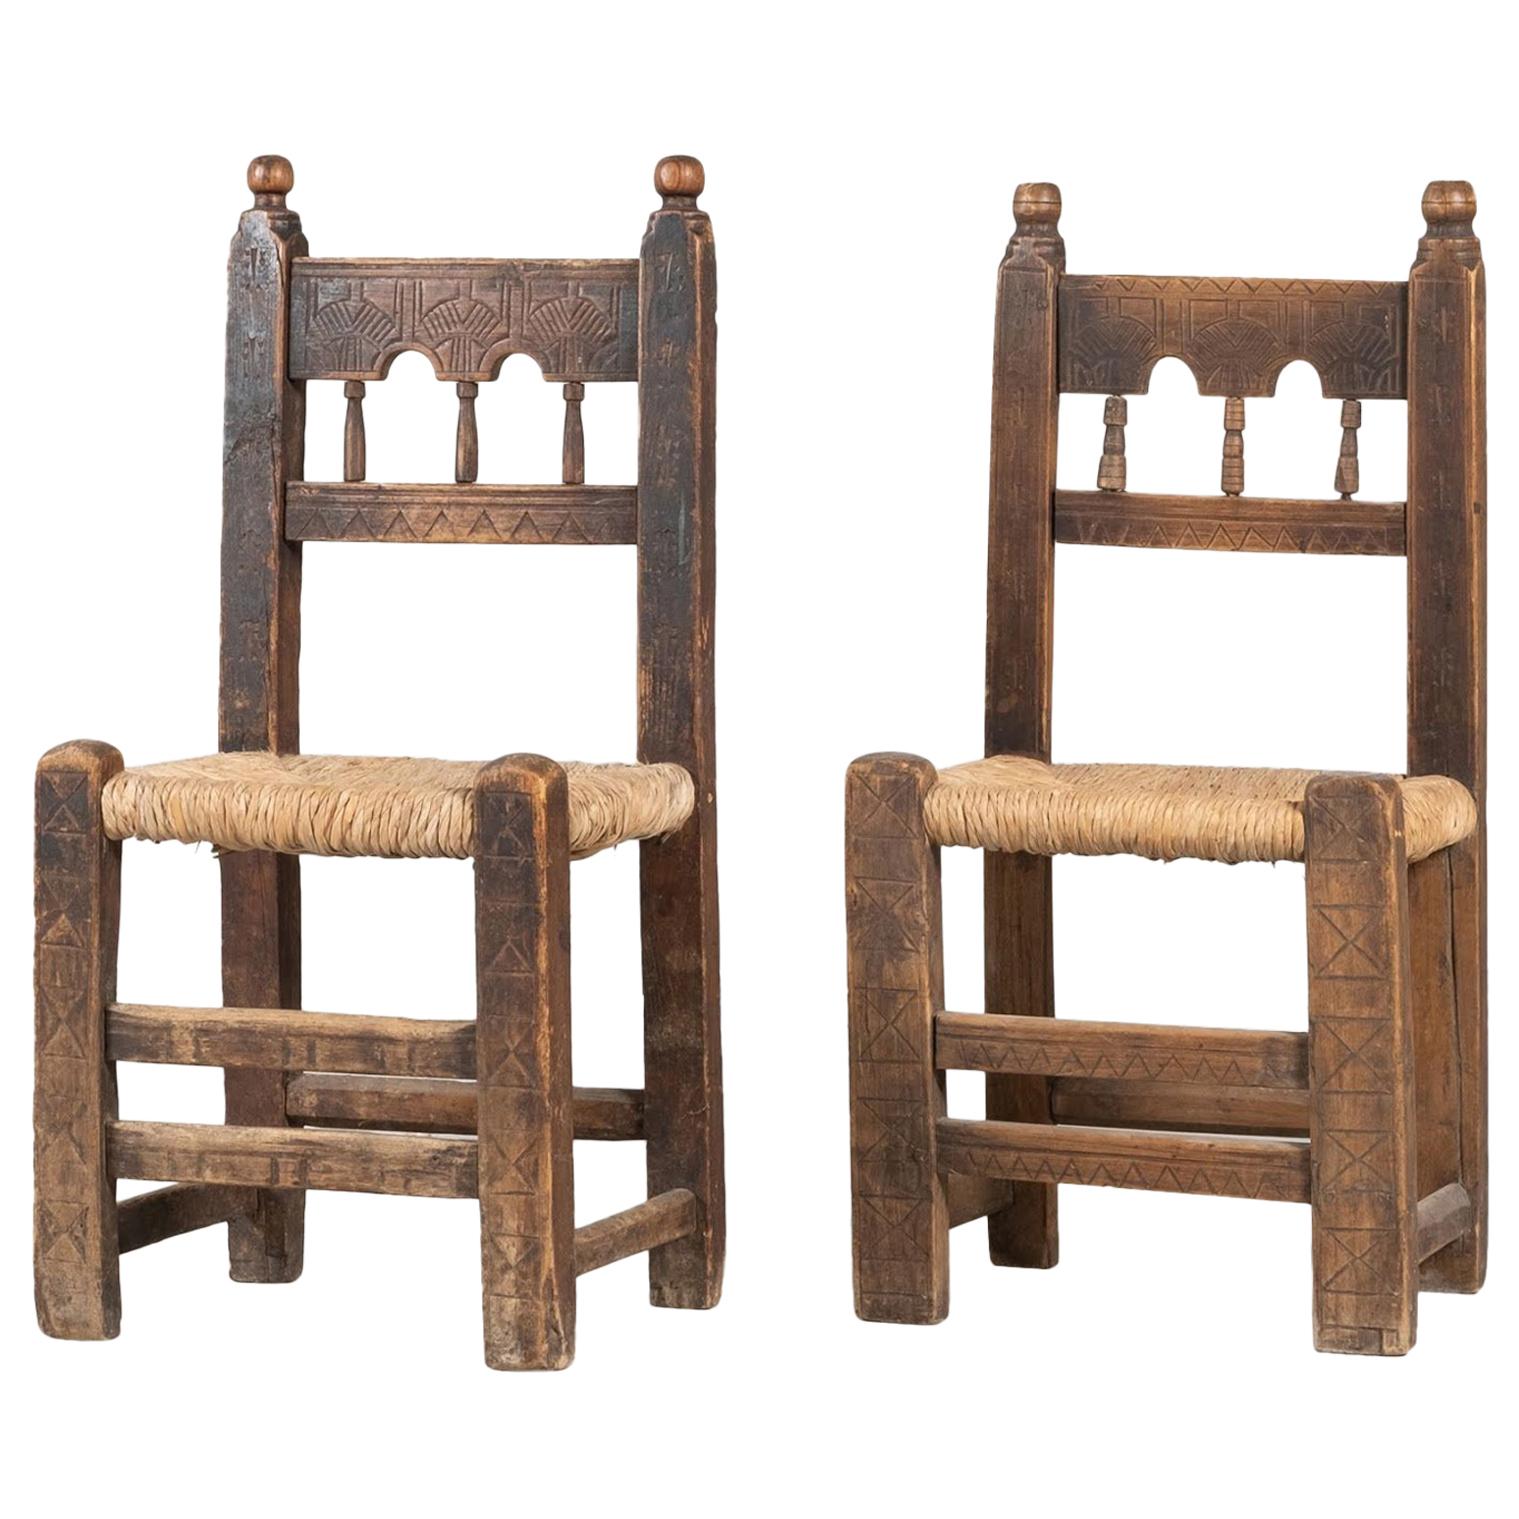 Poplar Straw-Bottom Chair, East Europe, Early 1800 For Sale